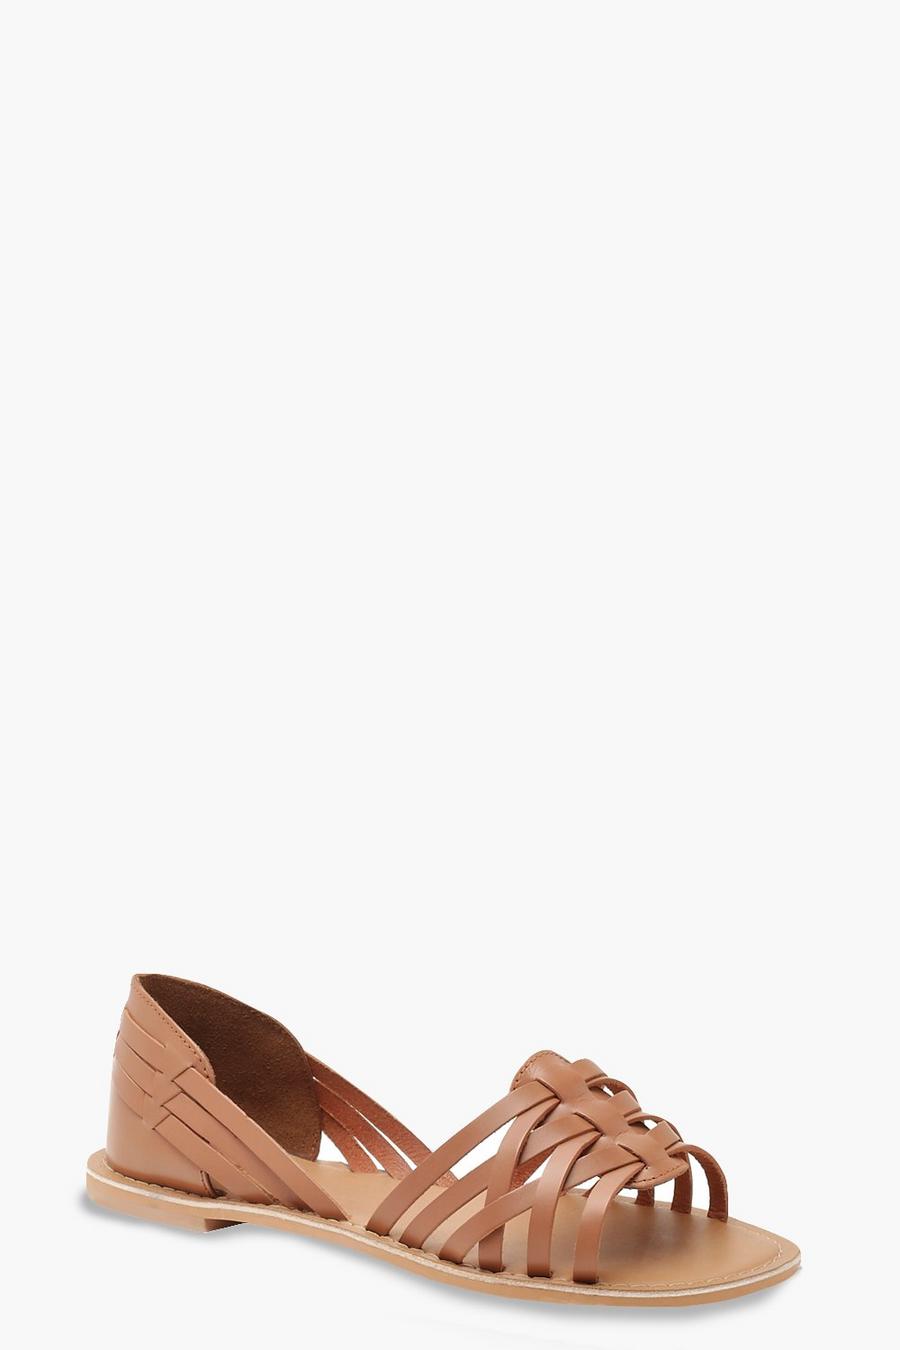 Tan brown Wide Width Woven Leather Ballet Flats